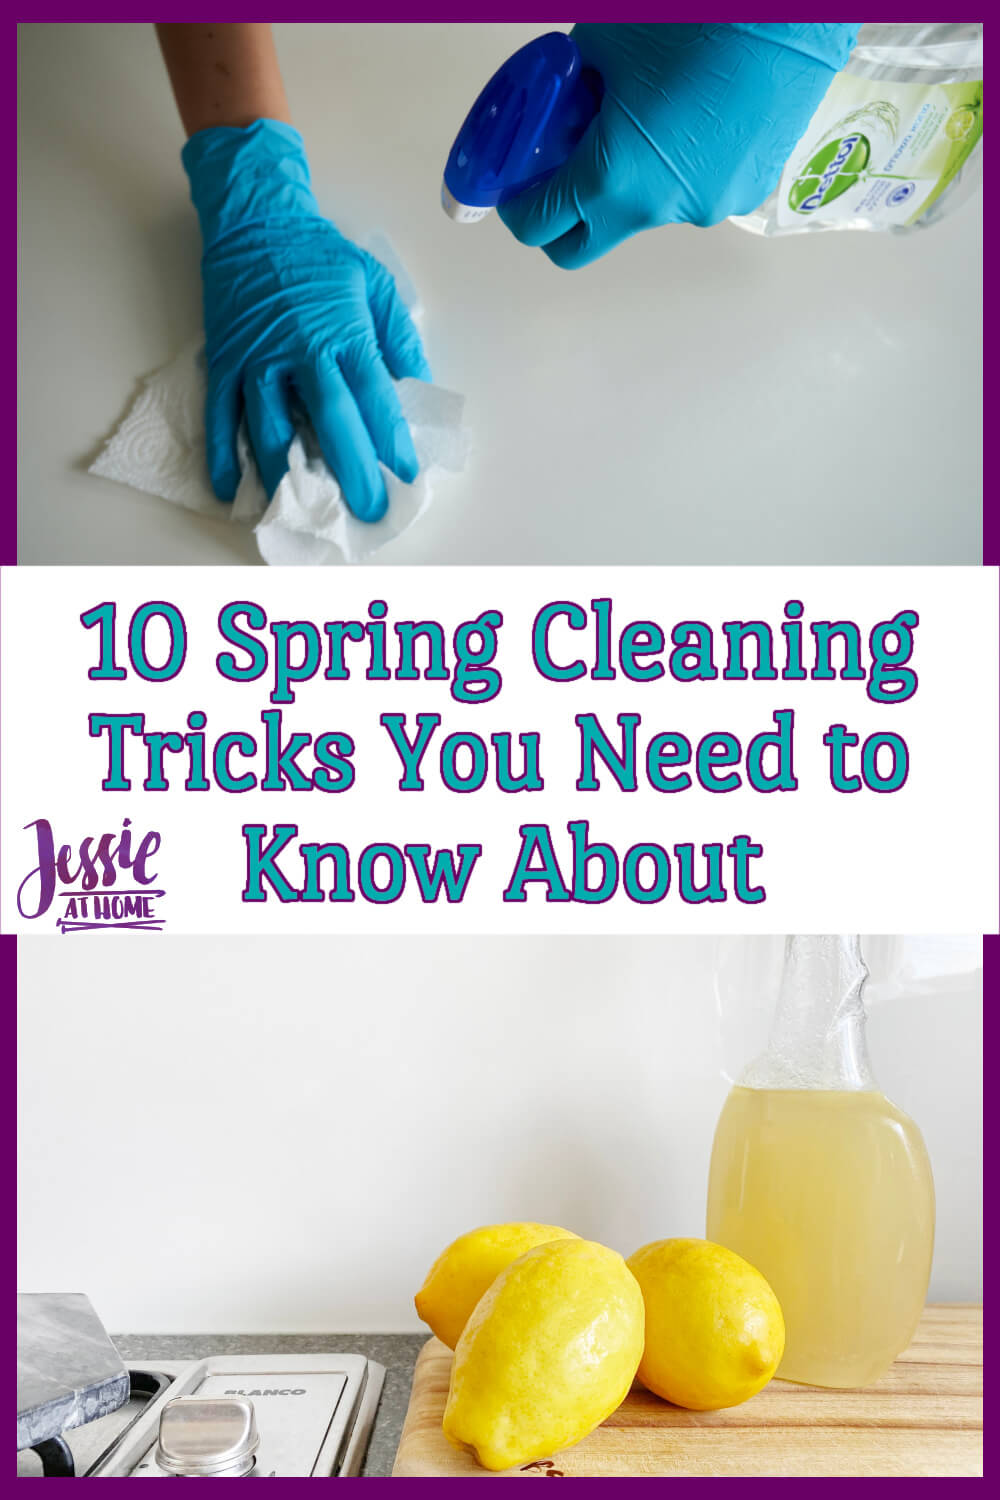 10 Spring Cleaning Tricks You Need to Know About